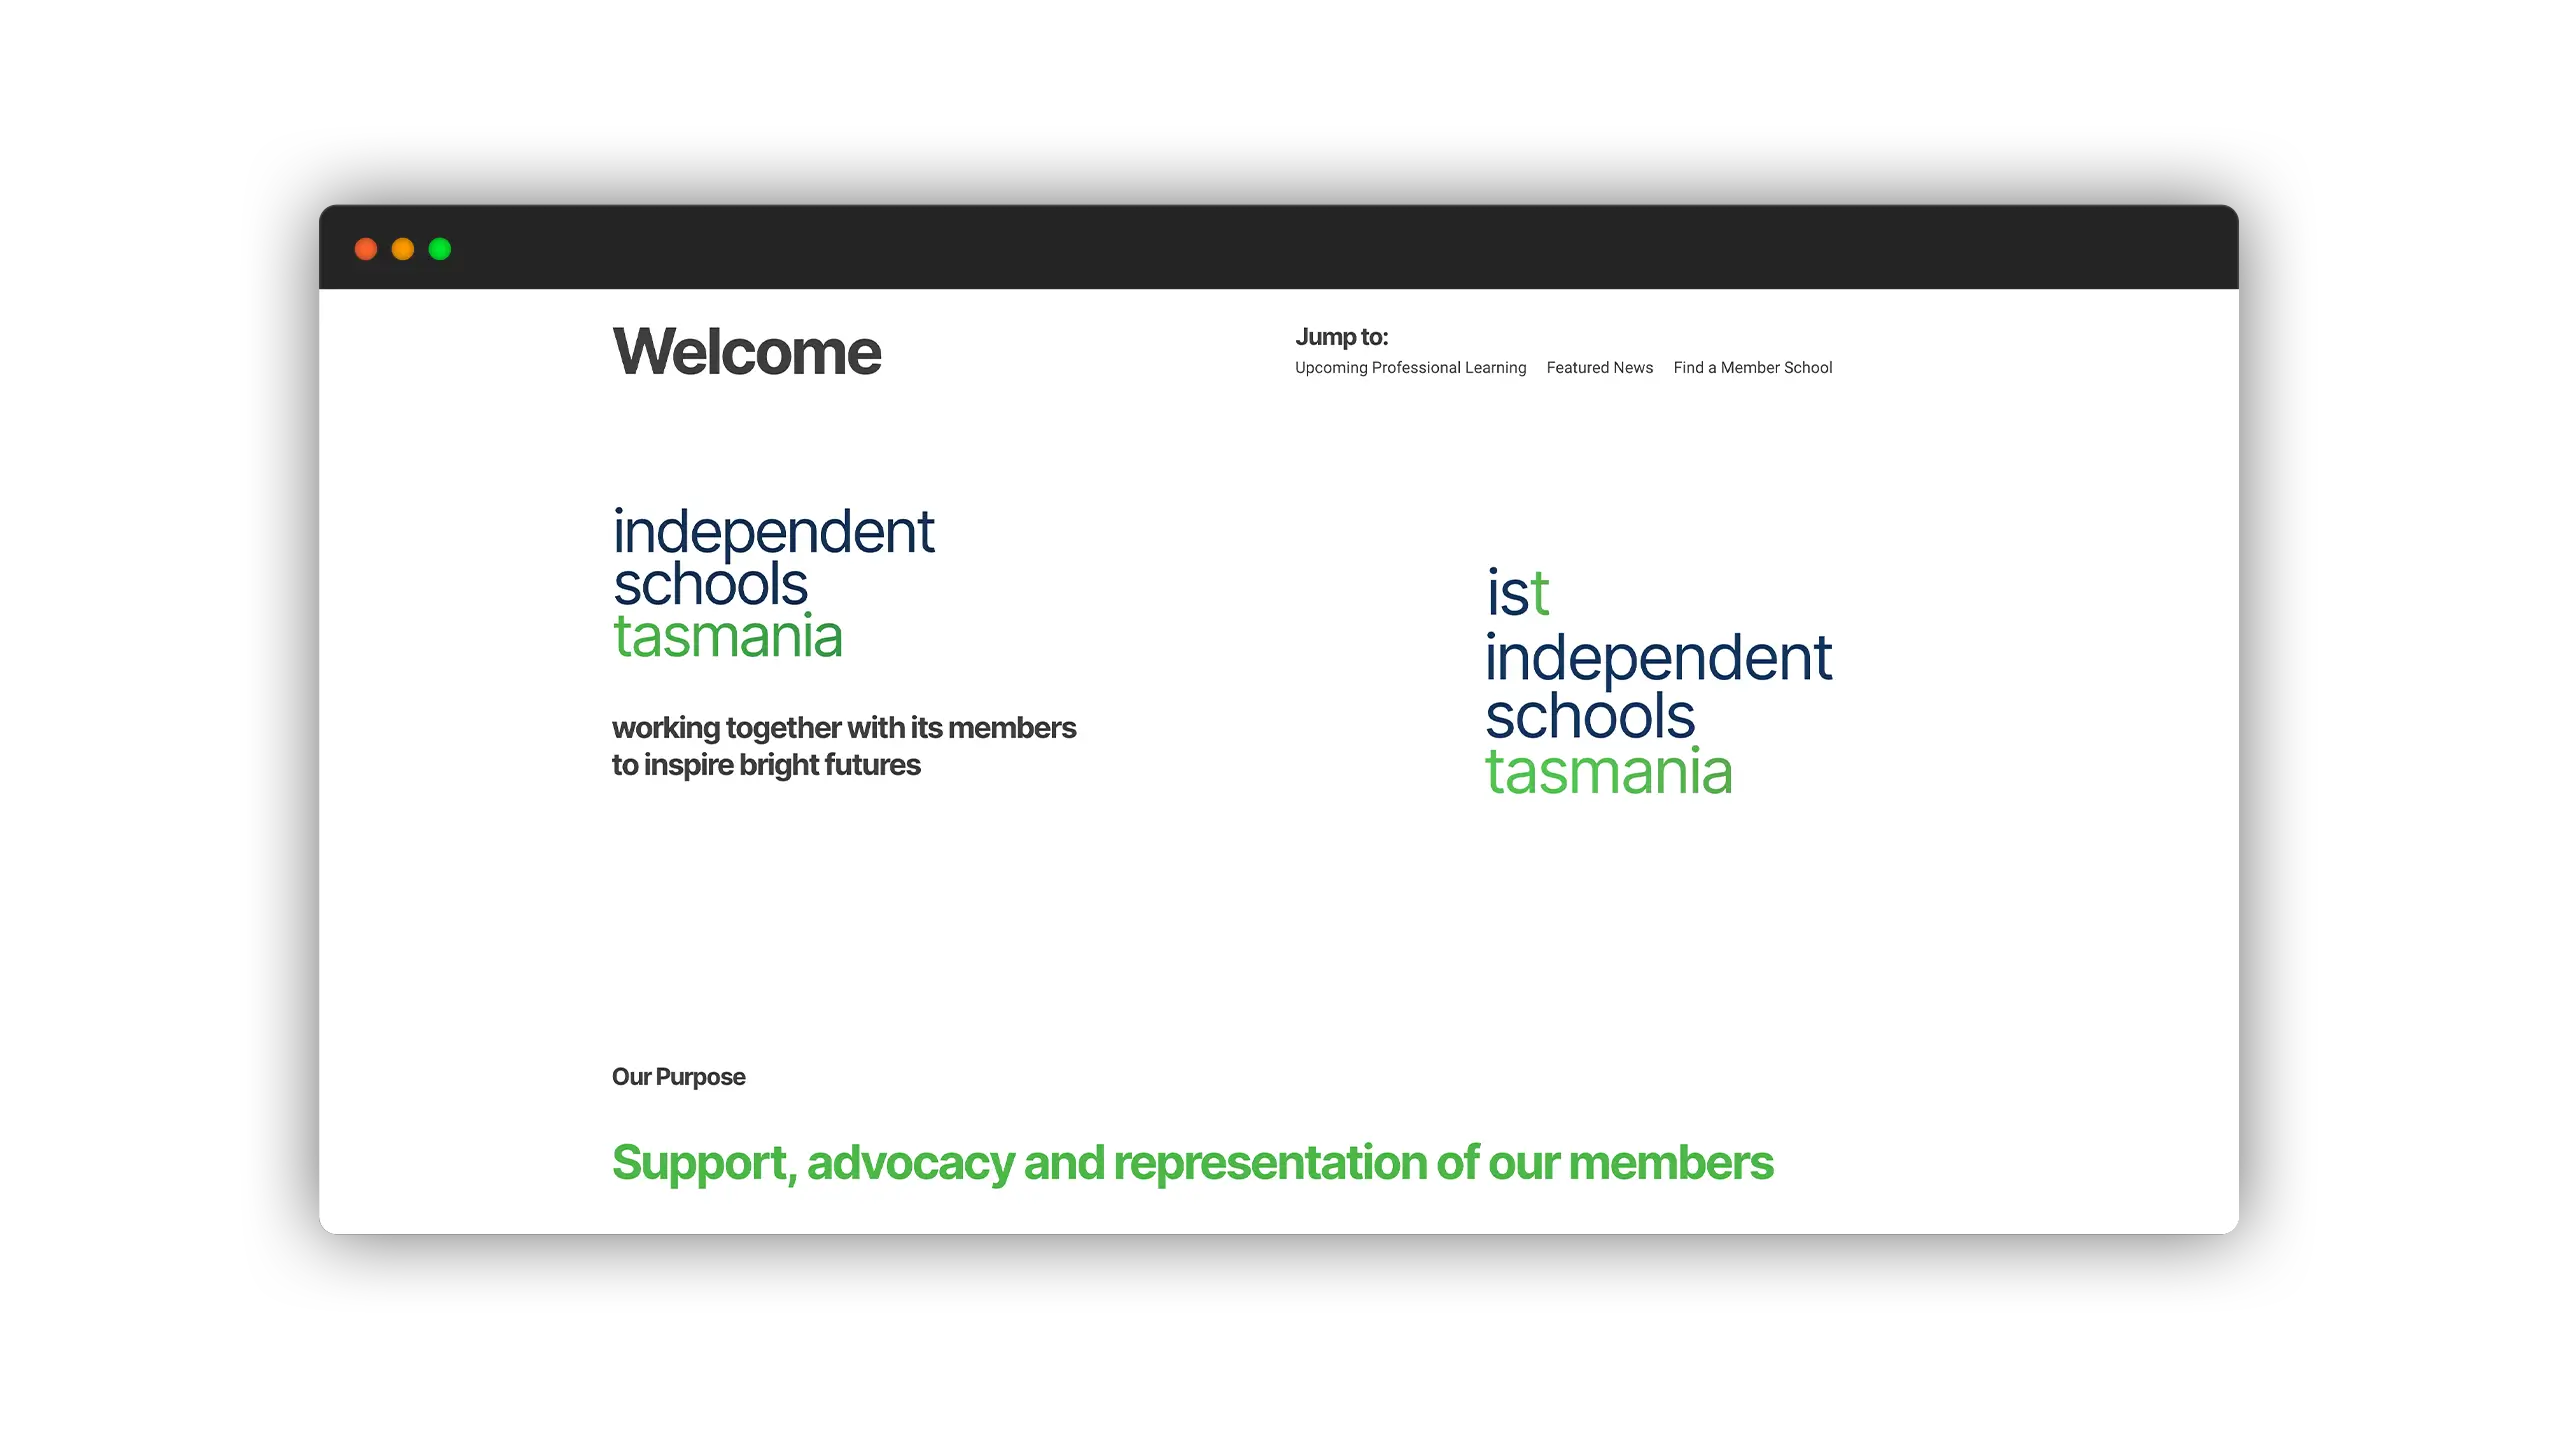 Independent Schools Tasmania - new website homepage introduction with video and welcome text